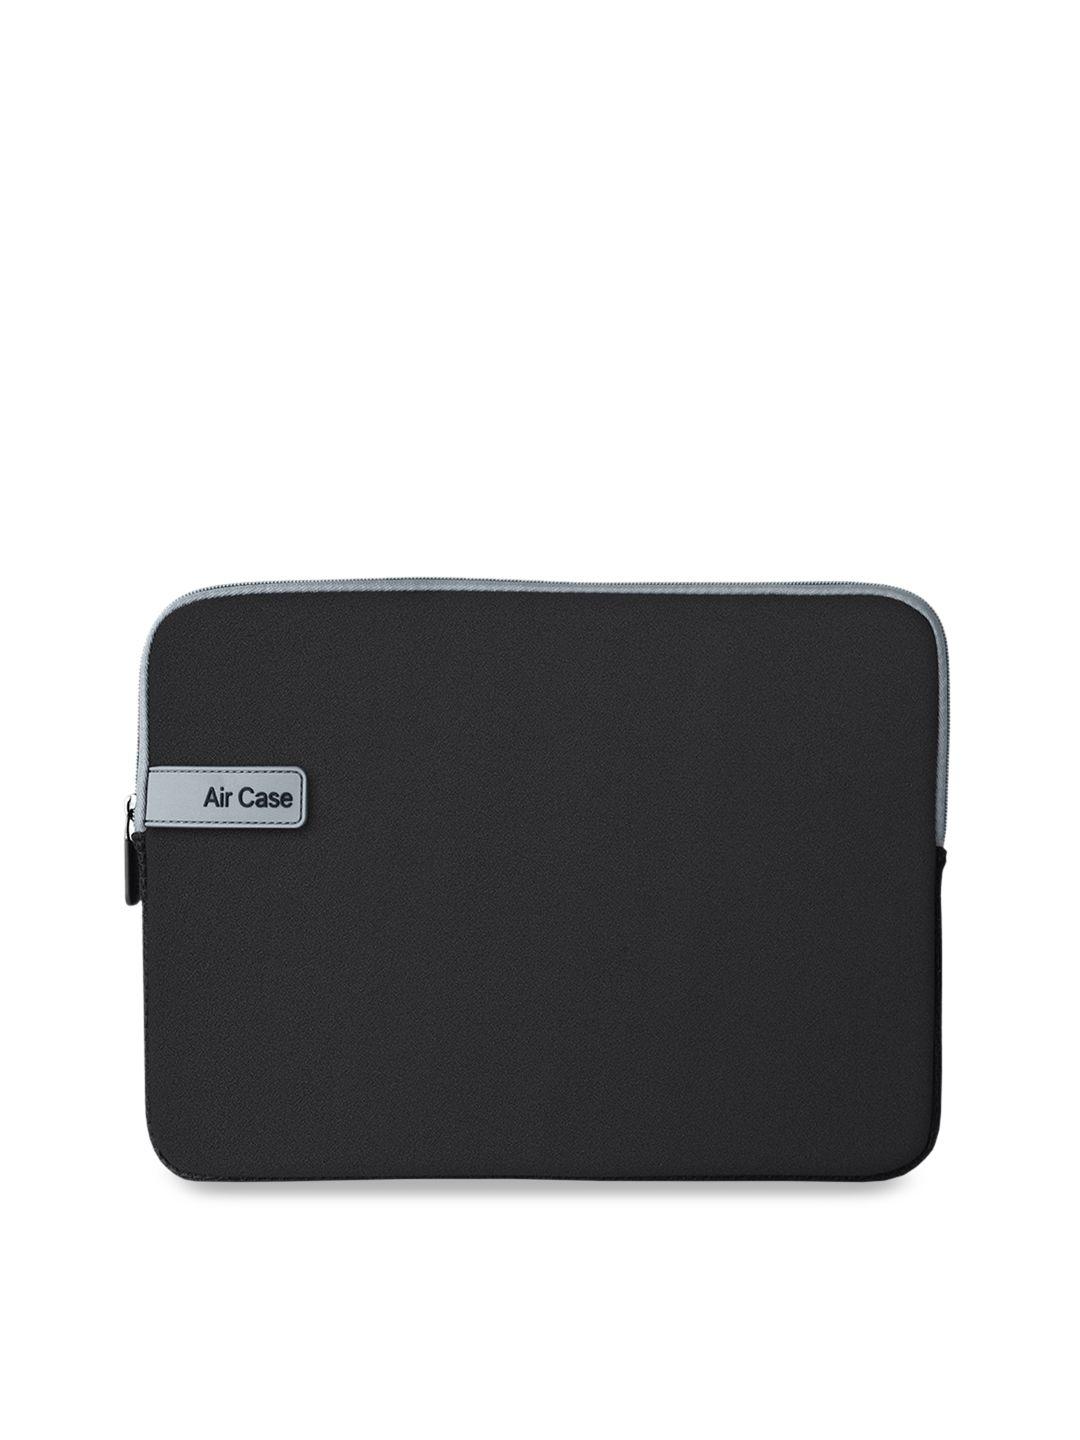 aircase unisex black solid 15.6-inch laptop sleeve